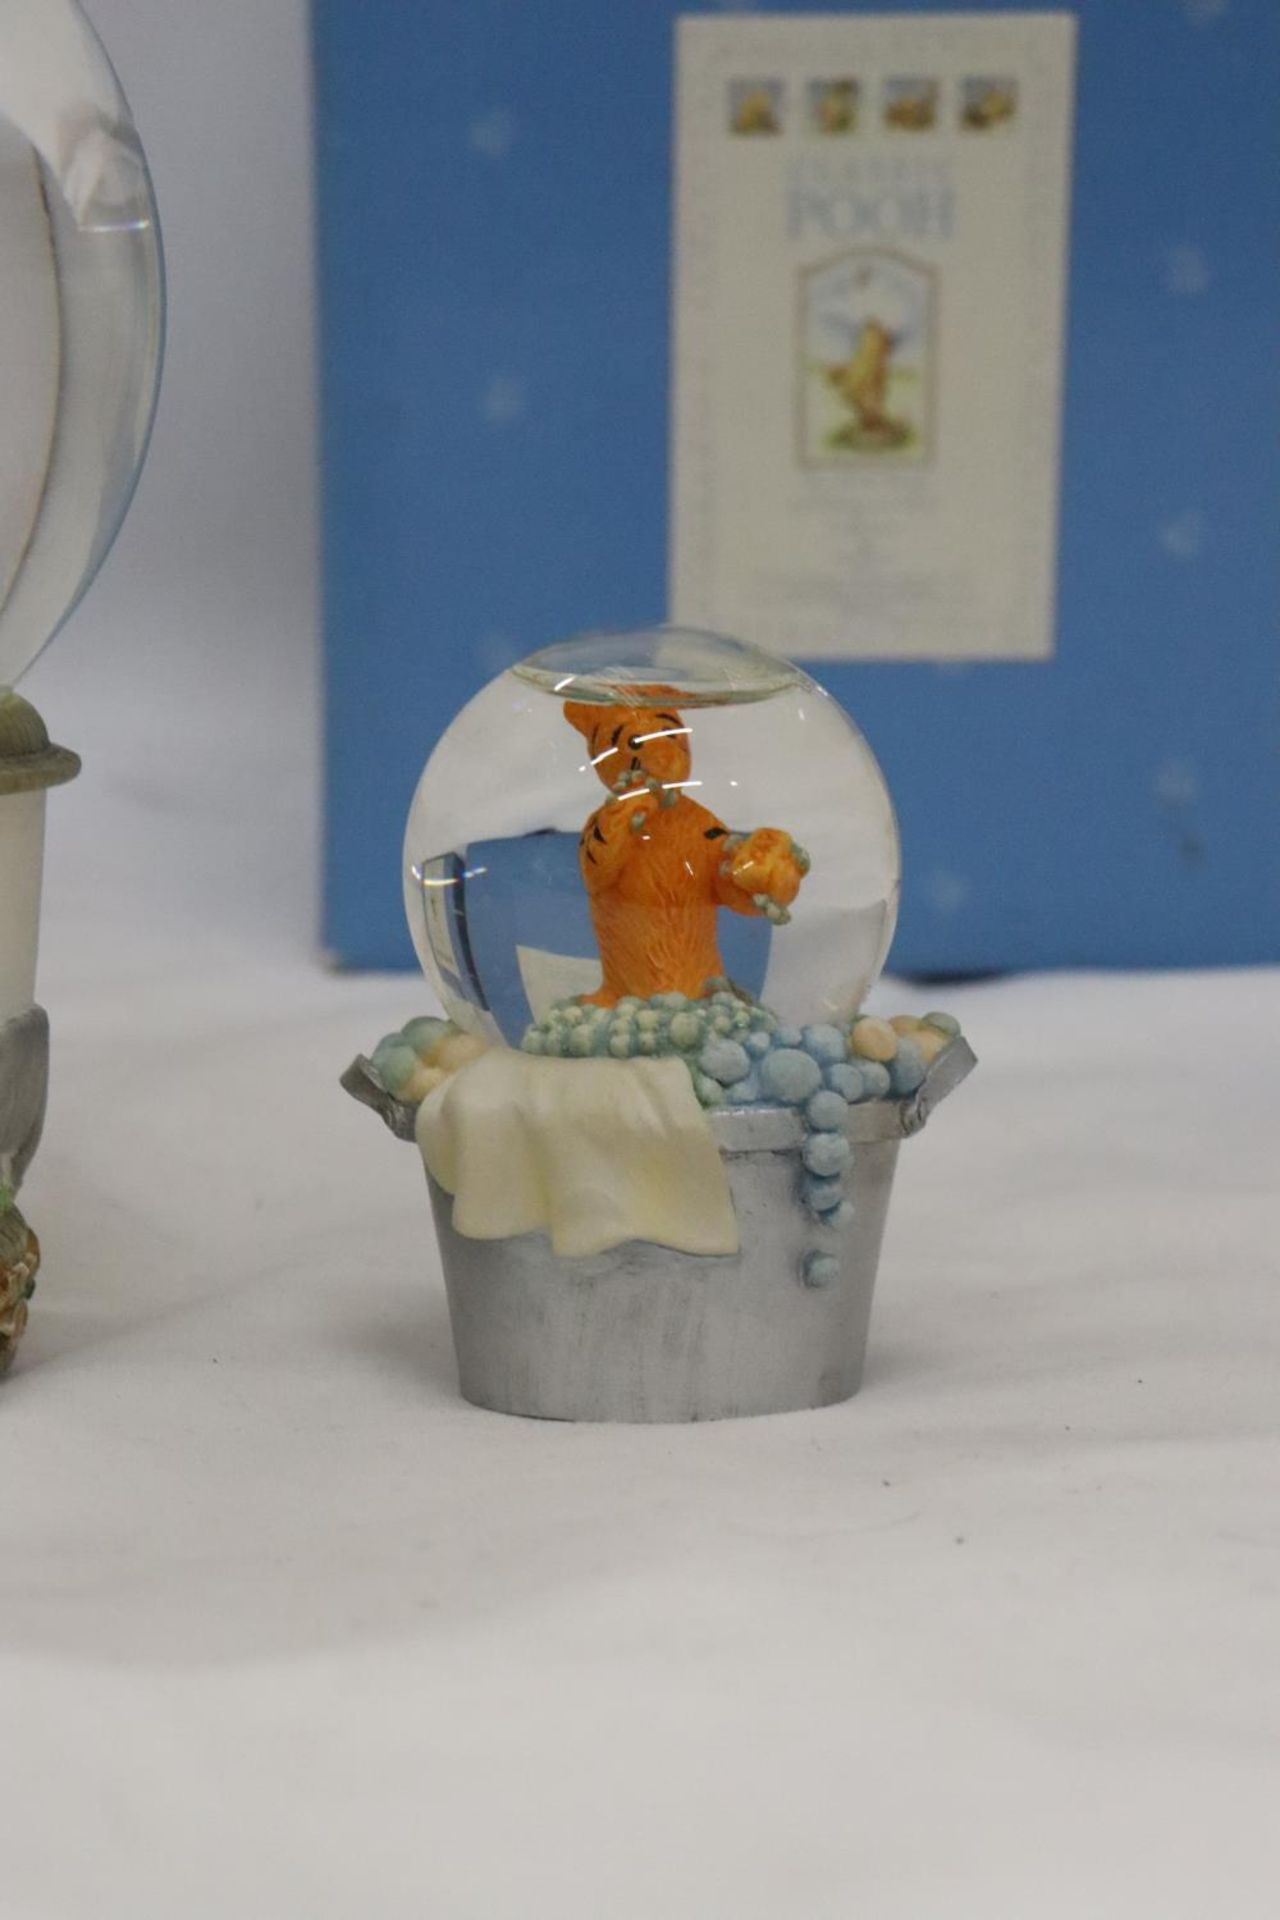 TWO BORDER FINE ARTS WINNIE THE POOH WATERBALLS, A LARGE WINNIE THE POOH AND PIGLET AND A SMALL - Image 3 of 4